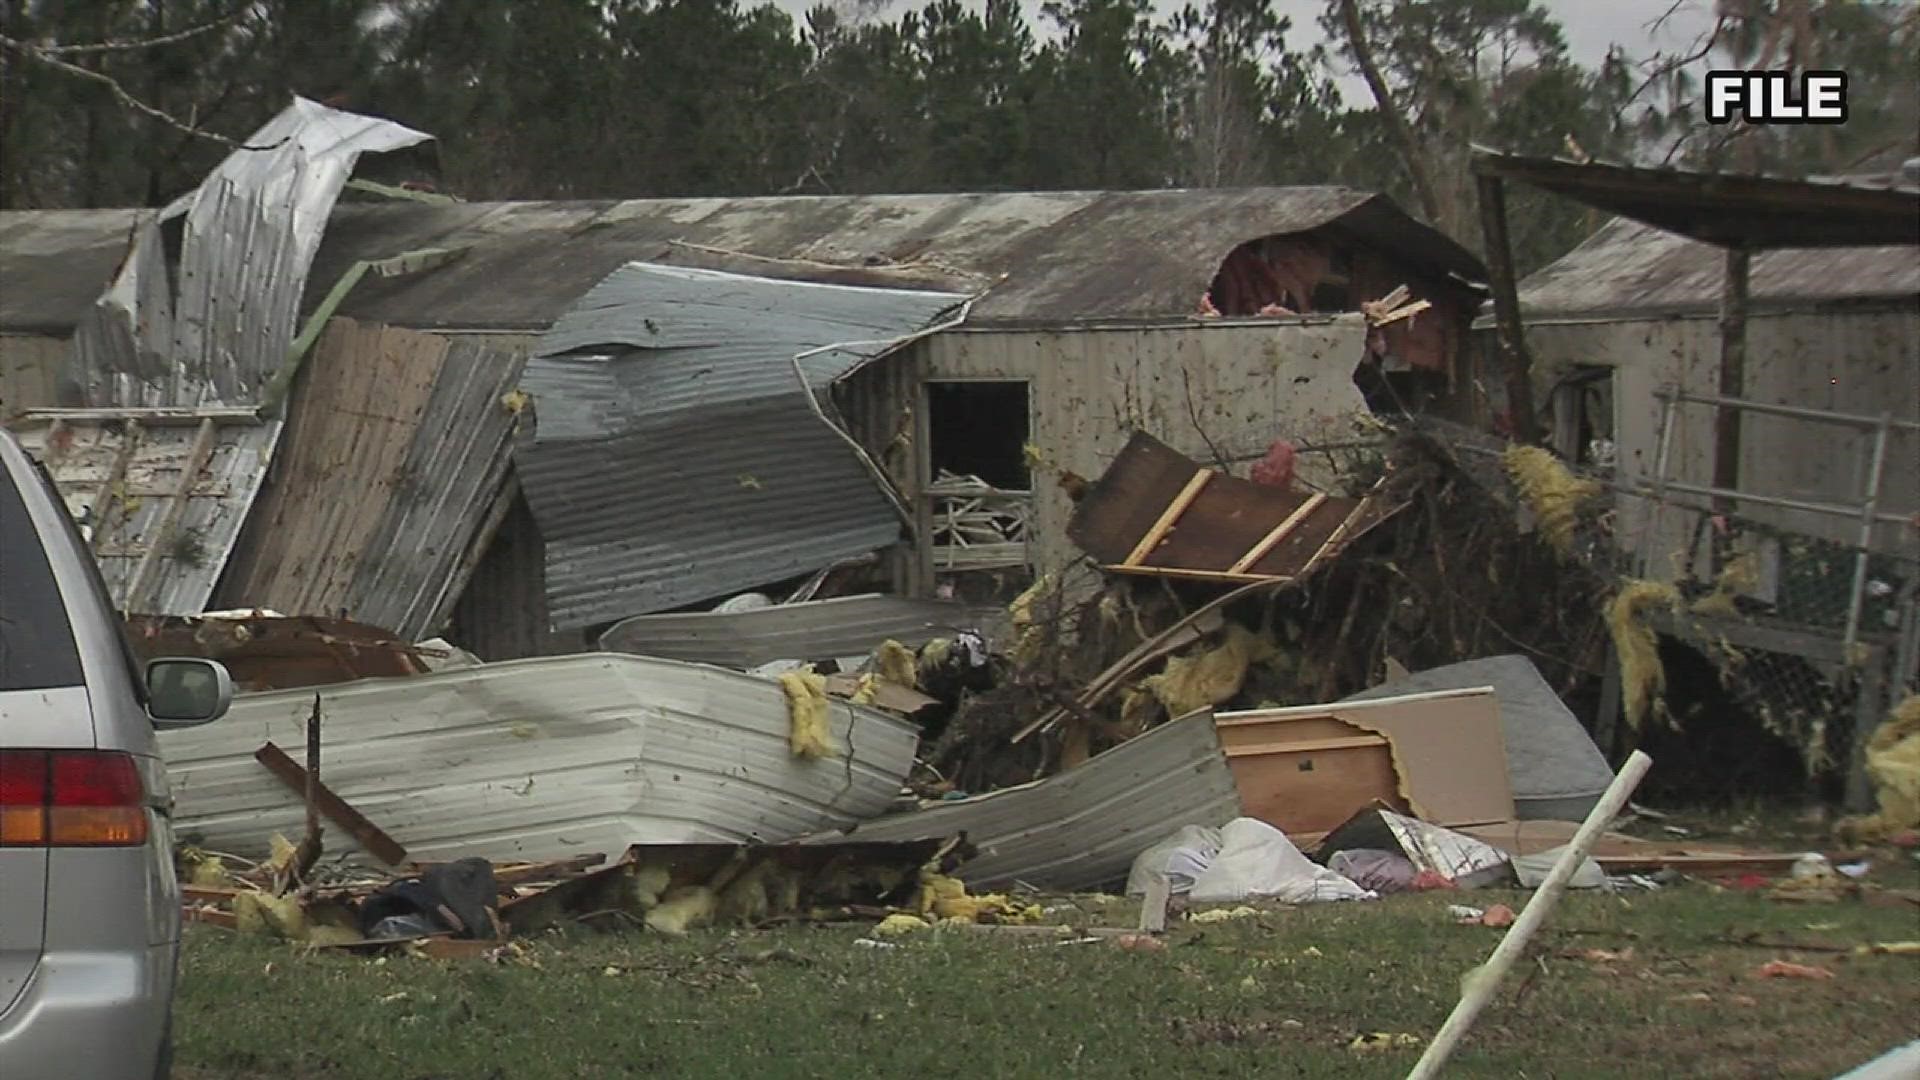 Nearly a week ago, an EF-1 and EF-2 tornado touched down in Orange County.